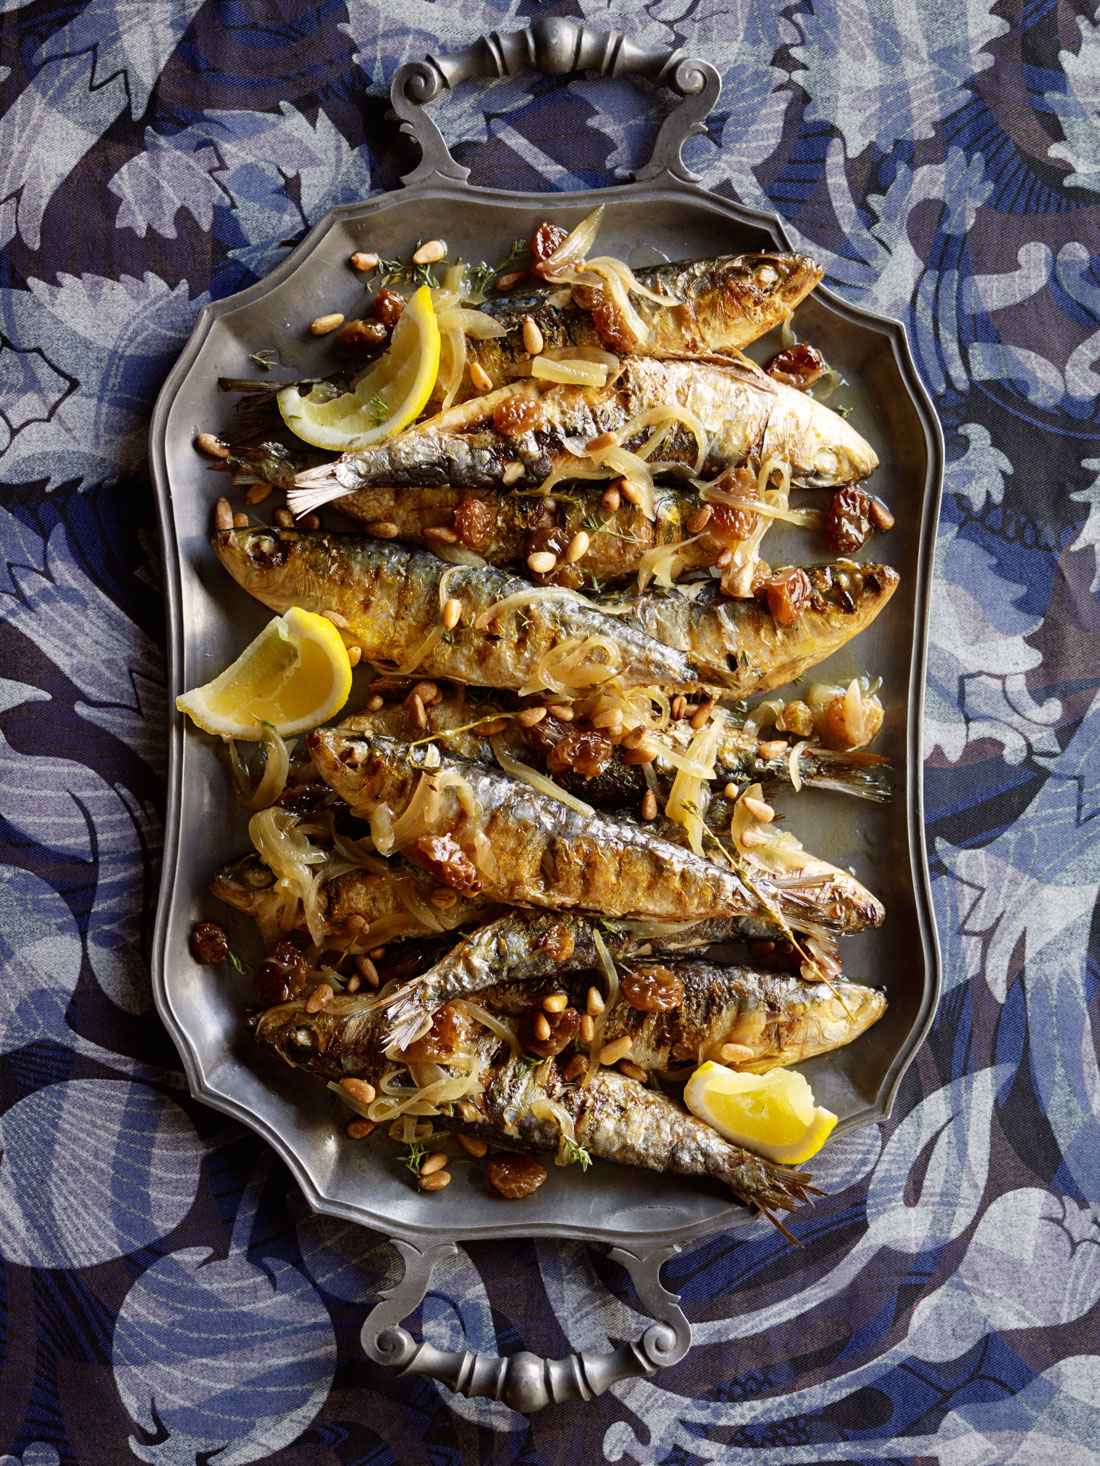 Italian Recipes with Sardines - Easy and quick to prepare!